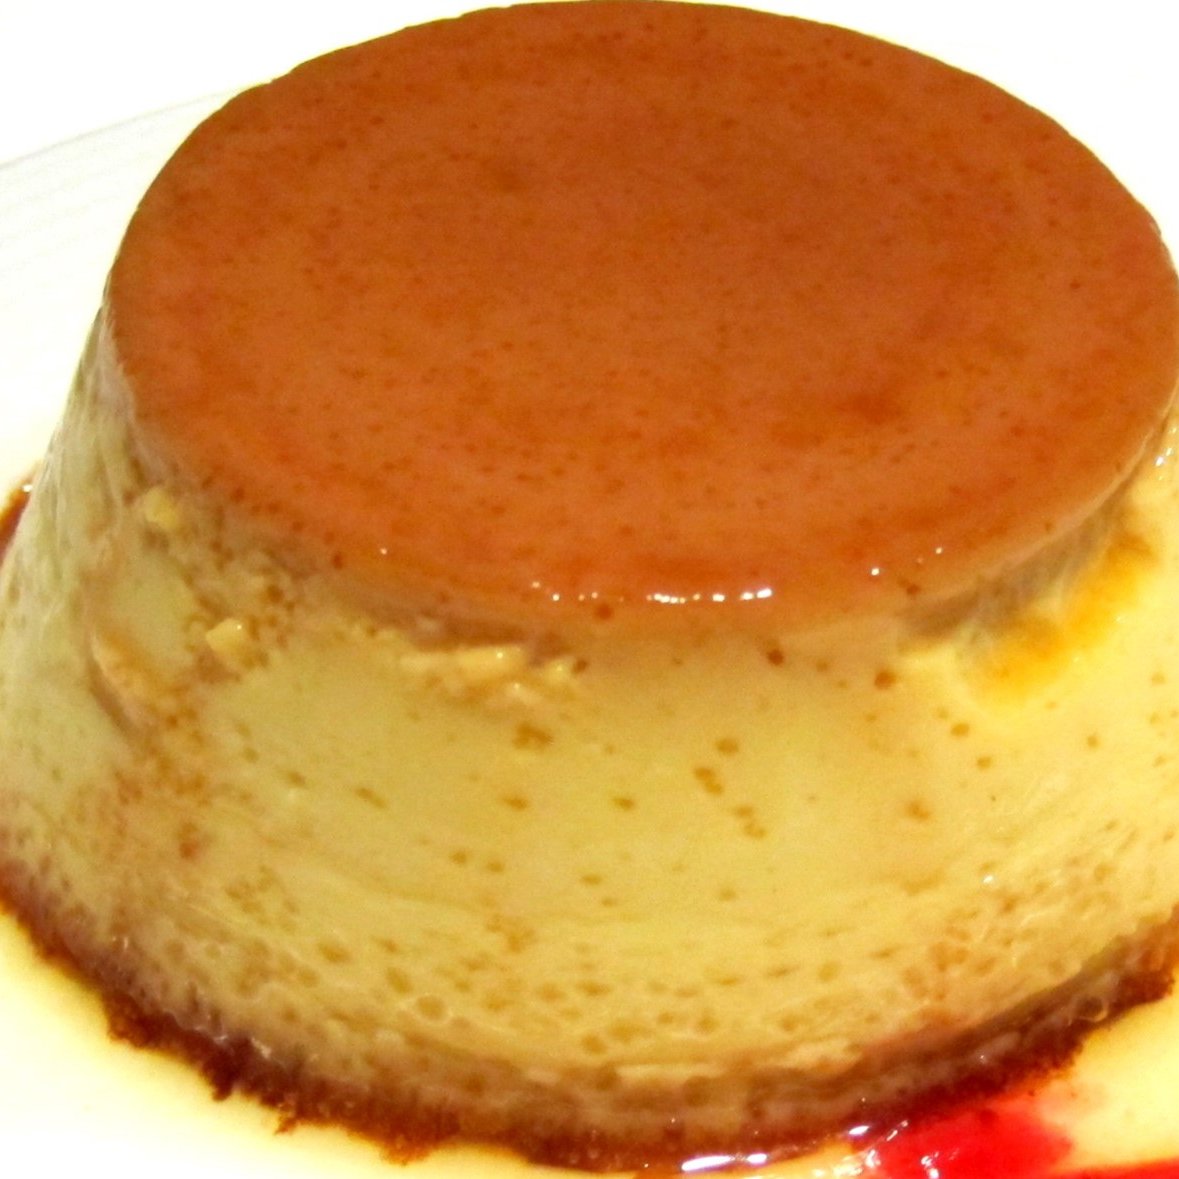 Indulge in Delicious Desserts at Our Mexican Restaurant